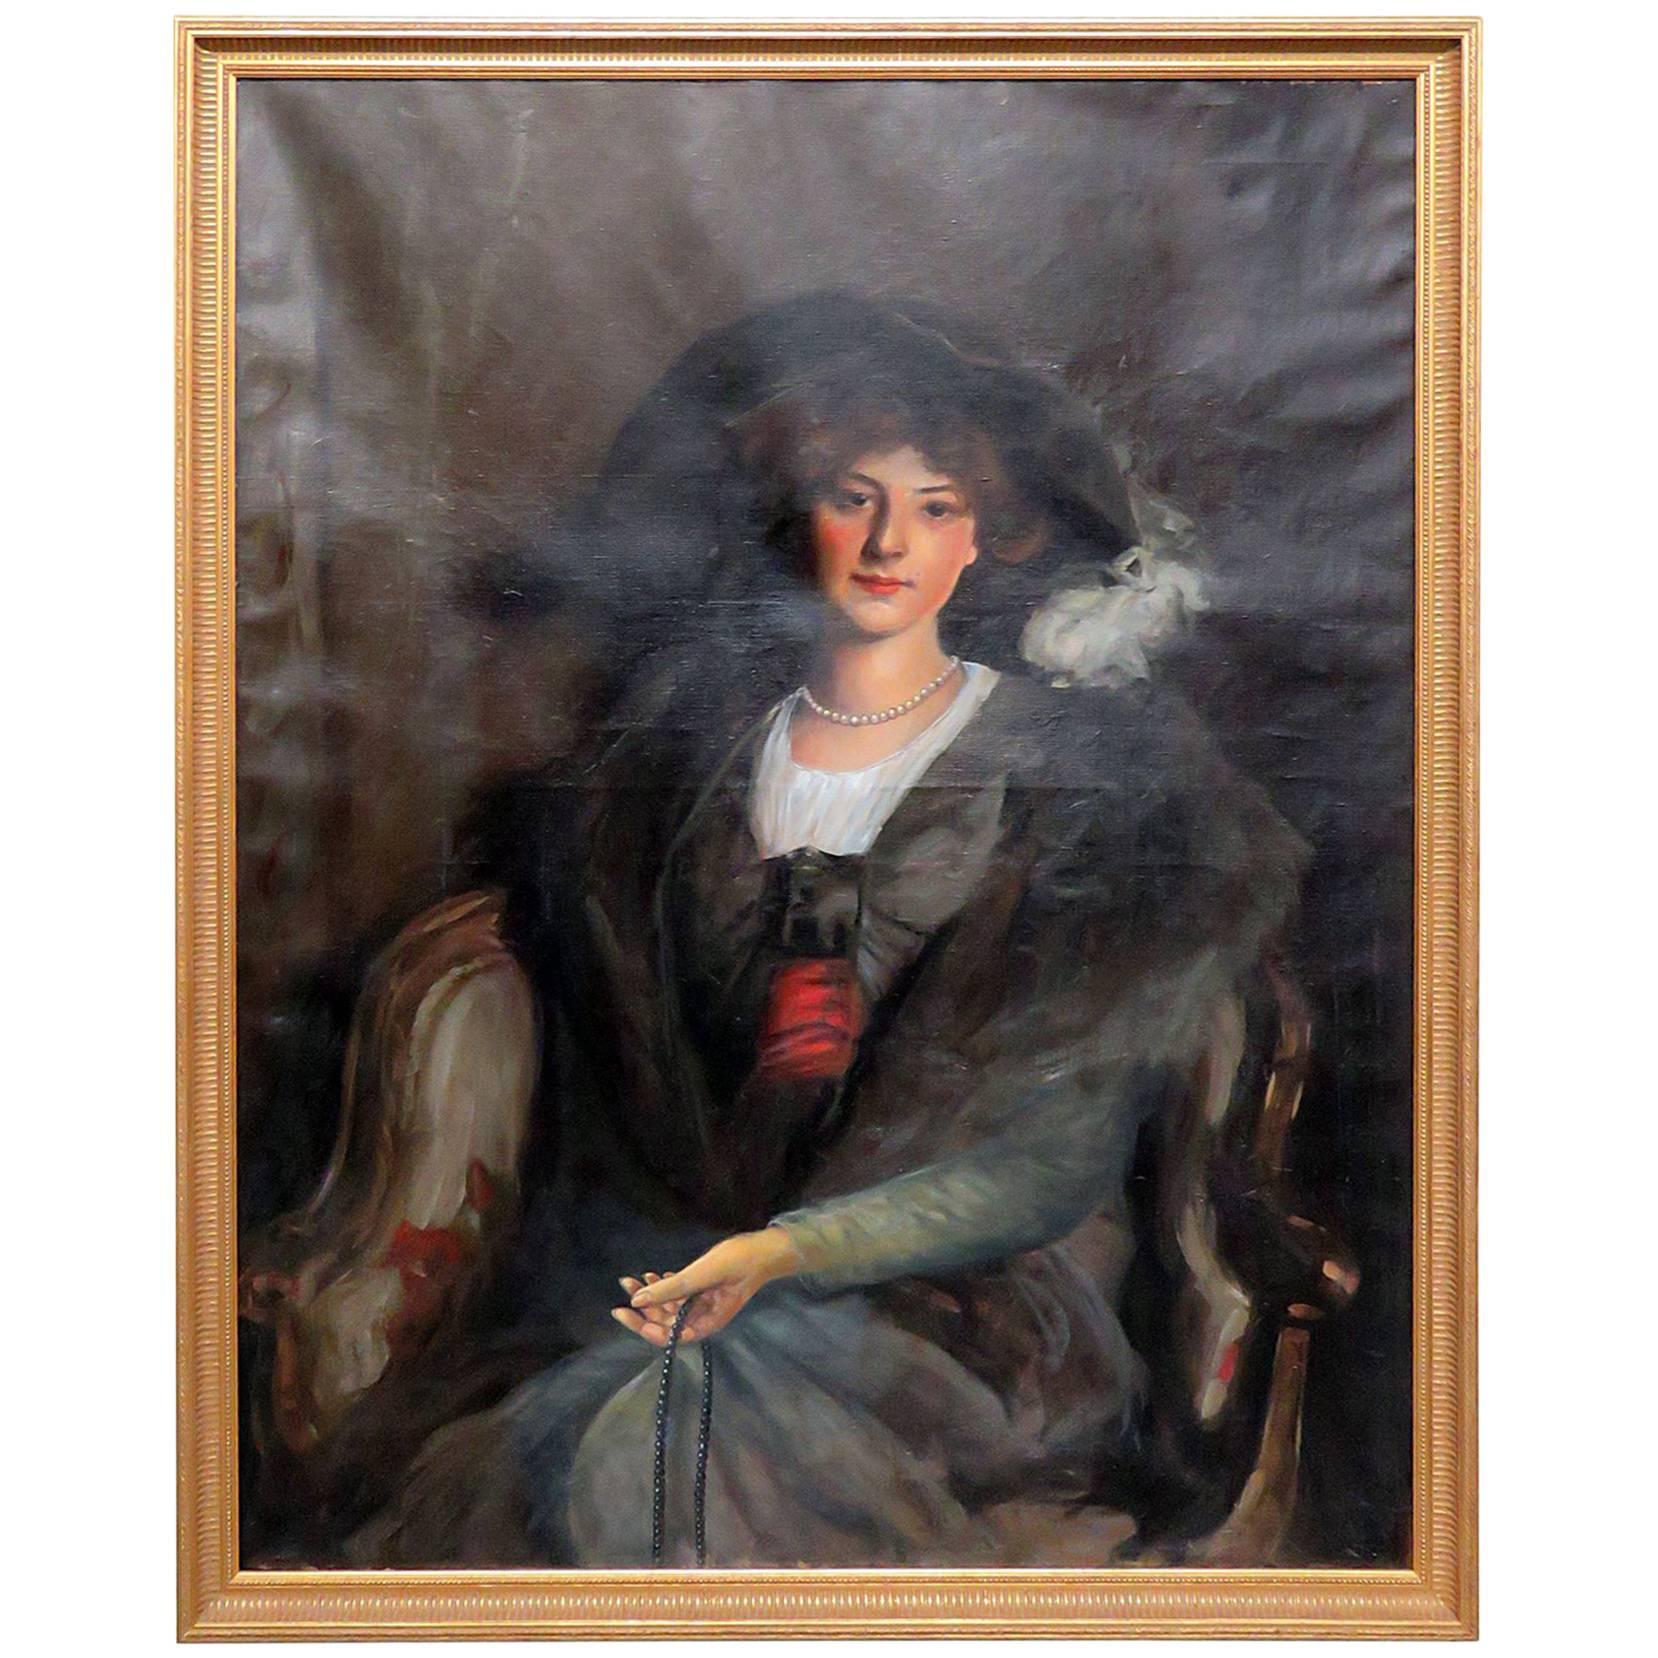 Antique Oil Painting of a Woman